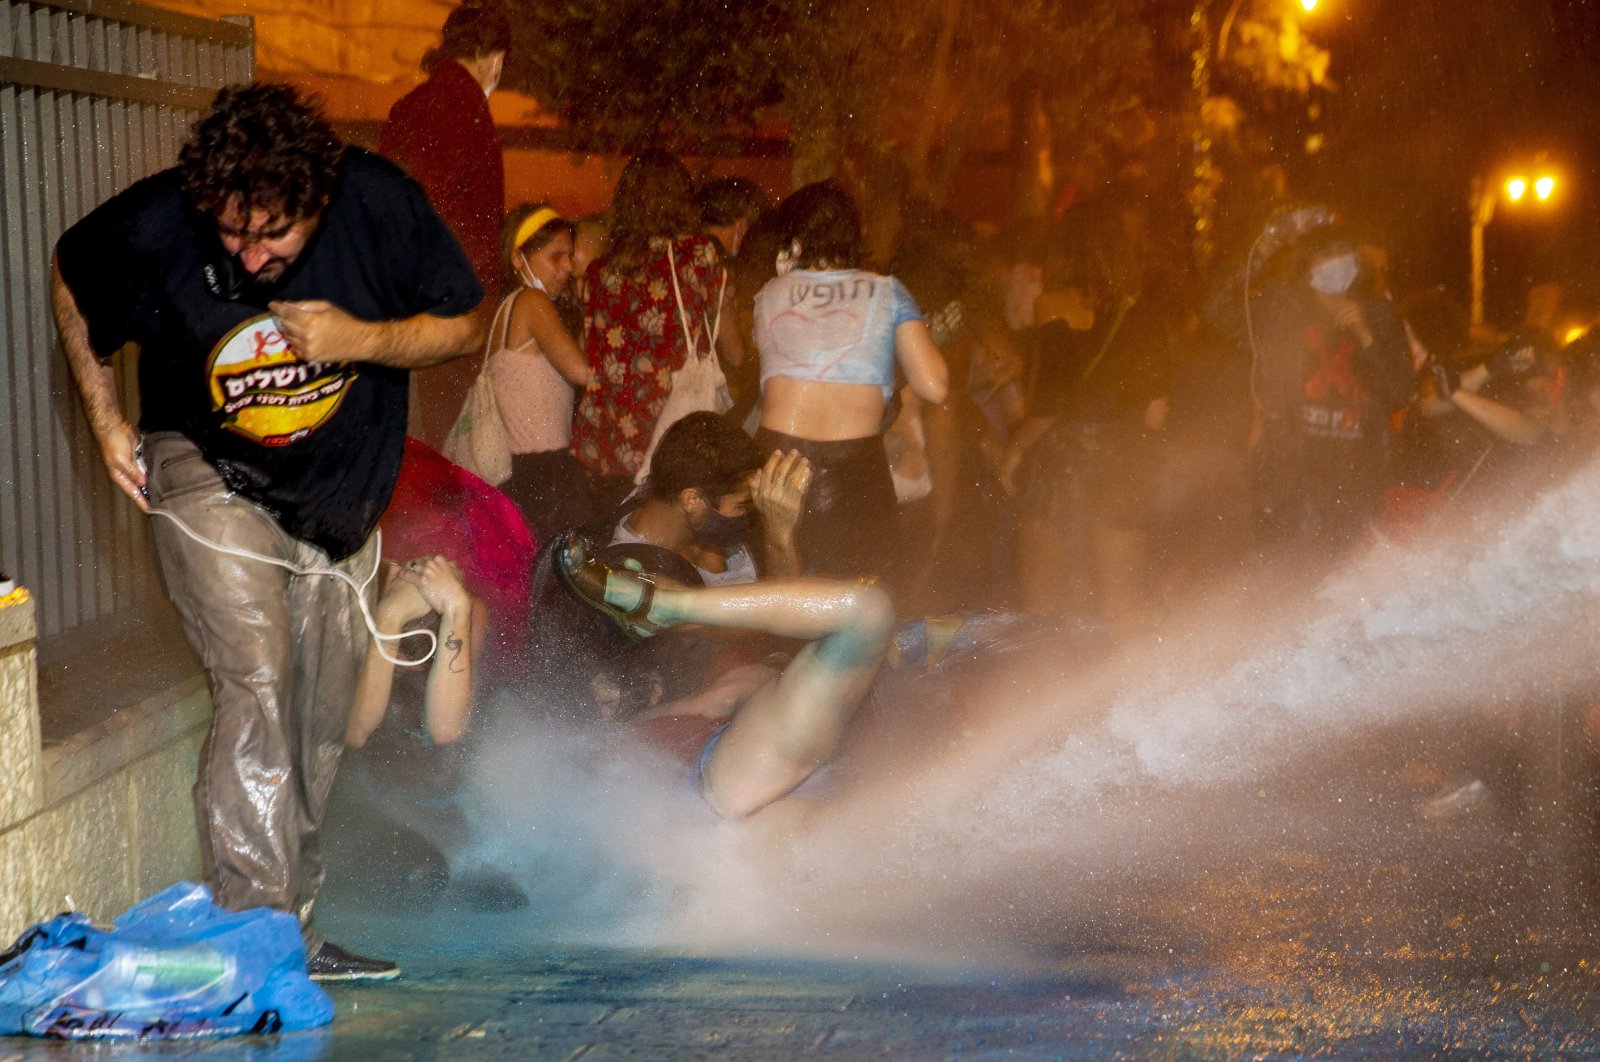 Police use a water cannon to disperse demonstrators during a protest against Israel's Prime Minister Benjamin Netanyahu outside his residence in Jerusalem, July 22, 2020. (AP Photo)